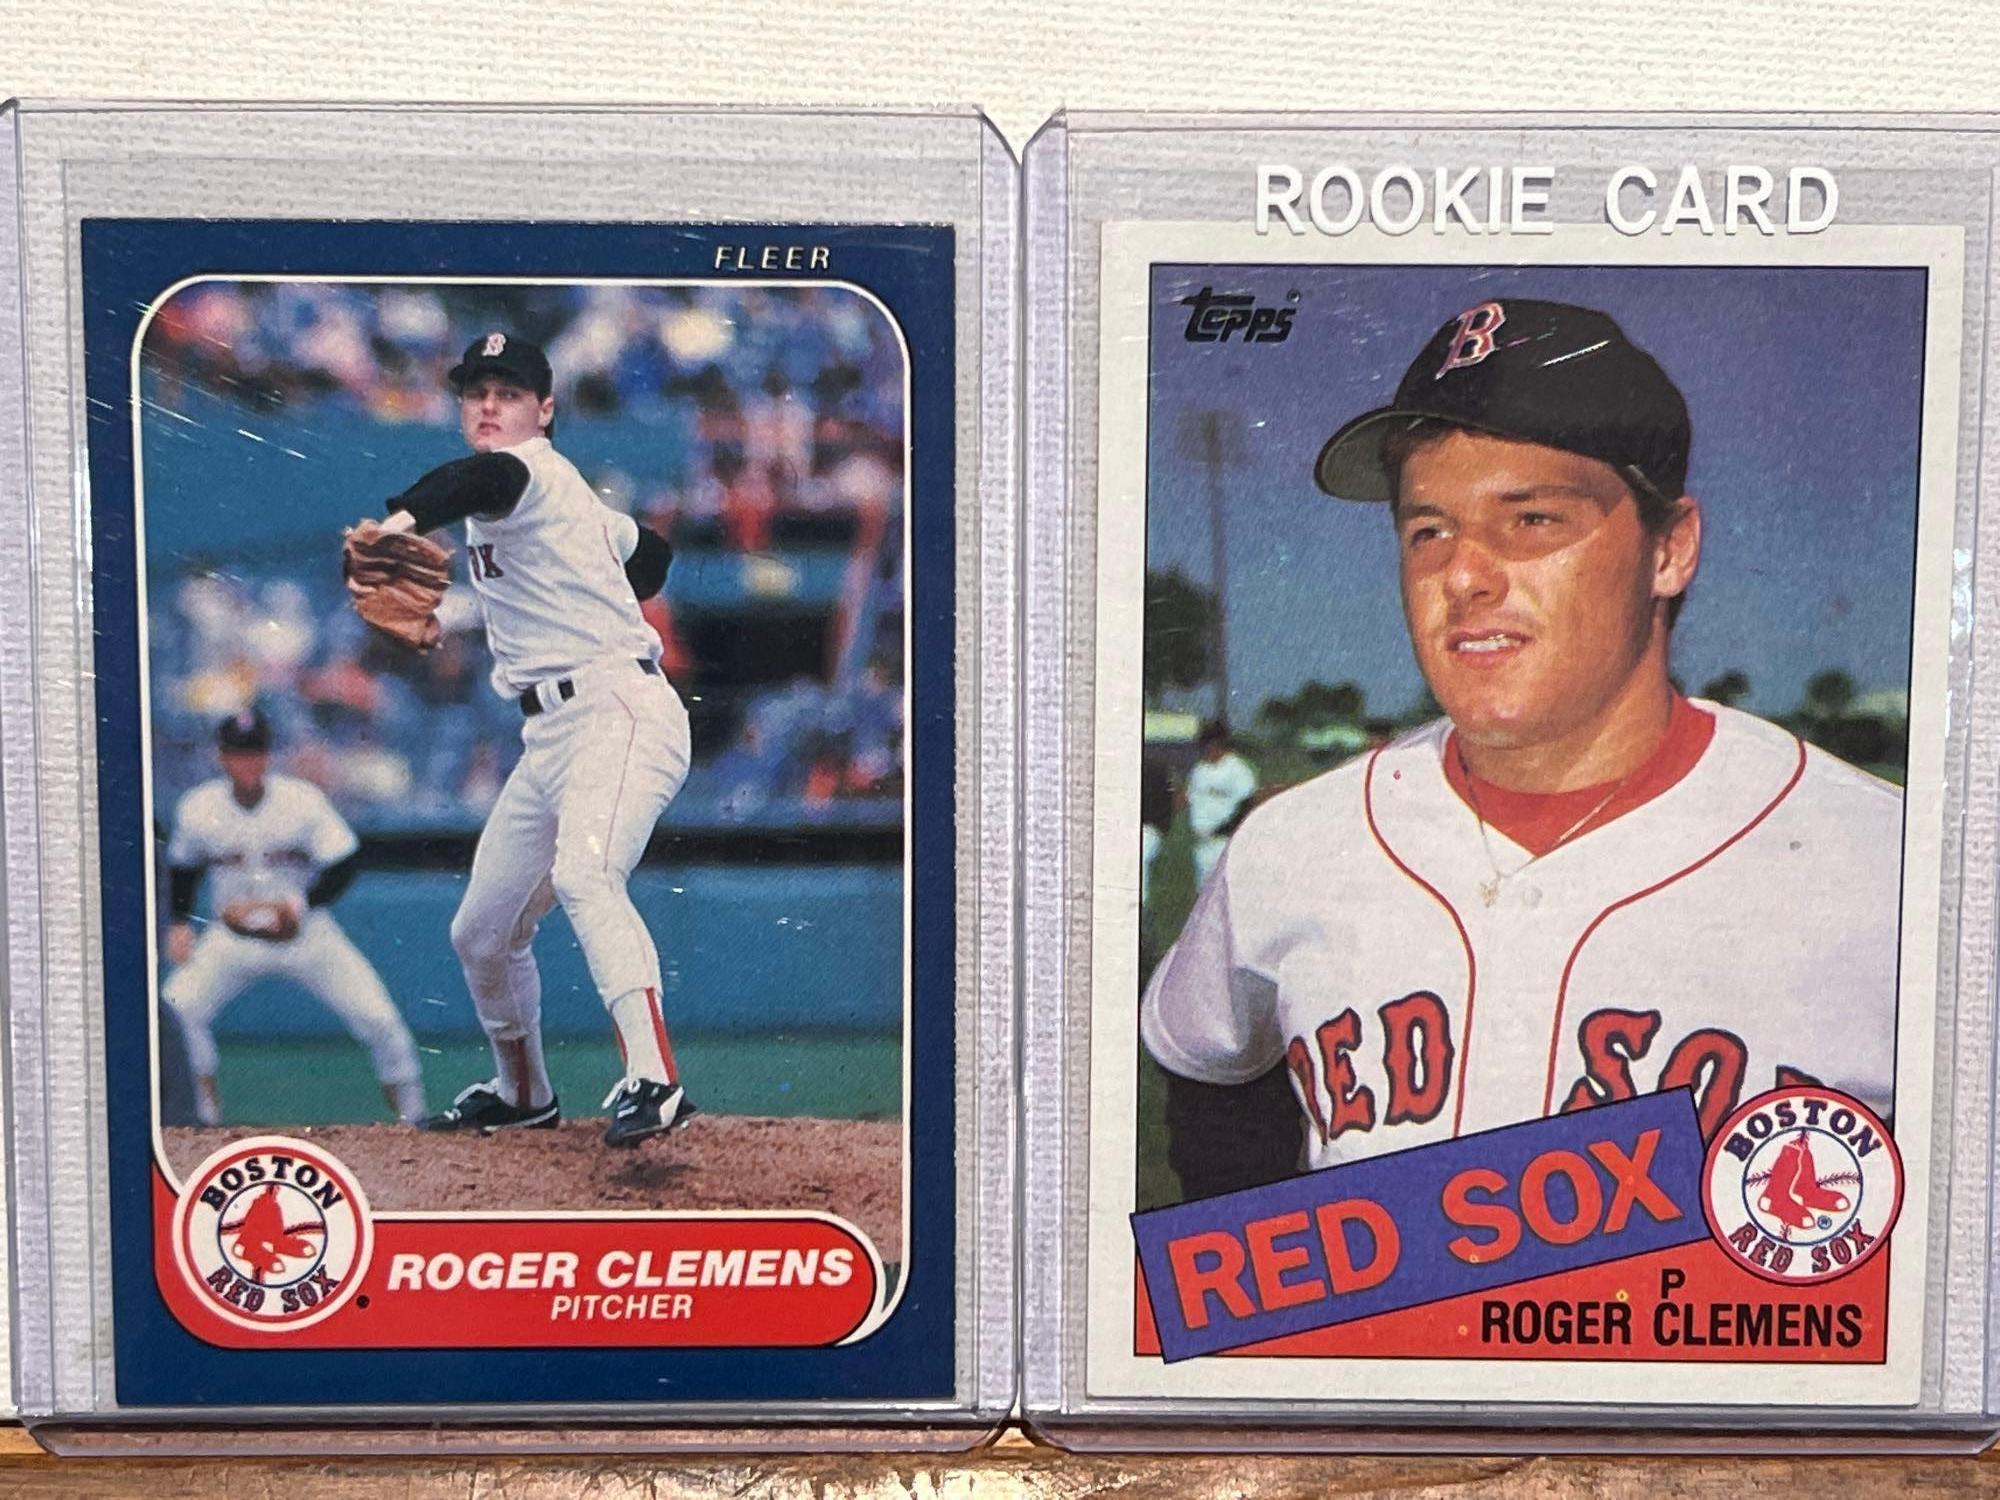 Roger Clemens Draft Pick Red Sox Baseball Card for Sale in